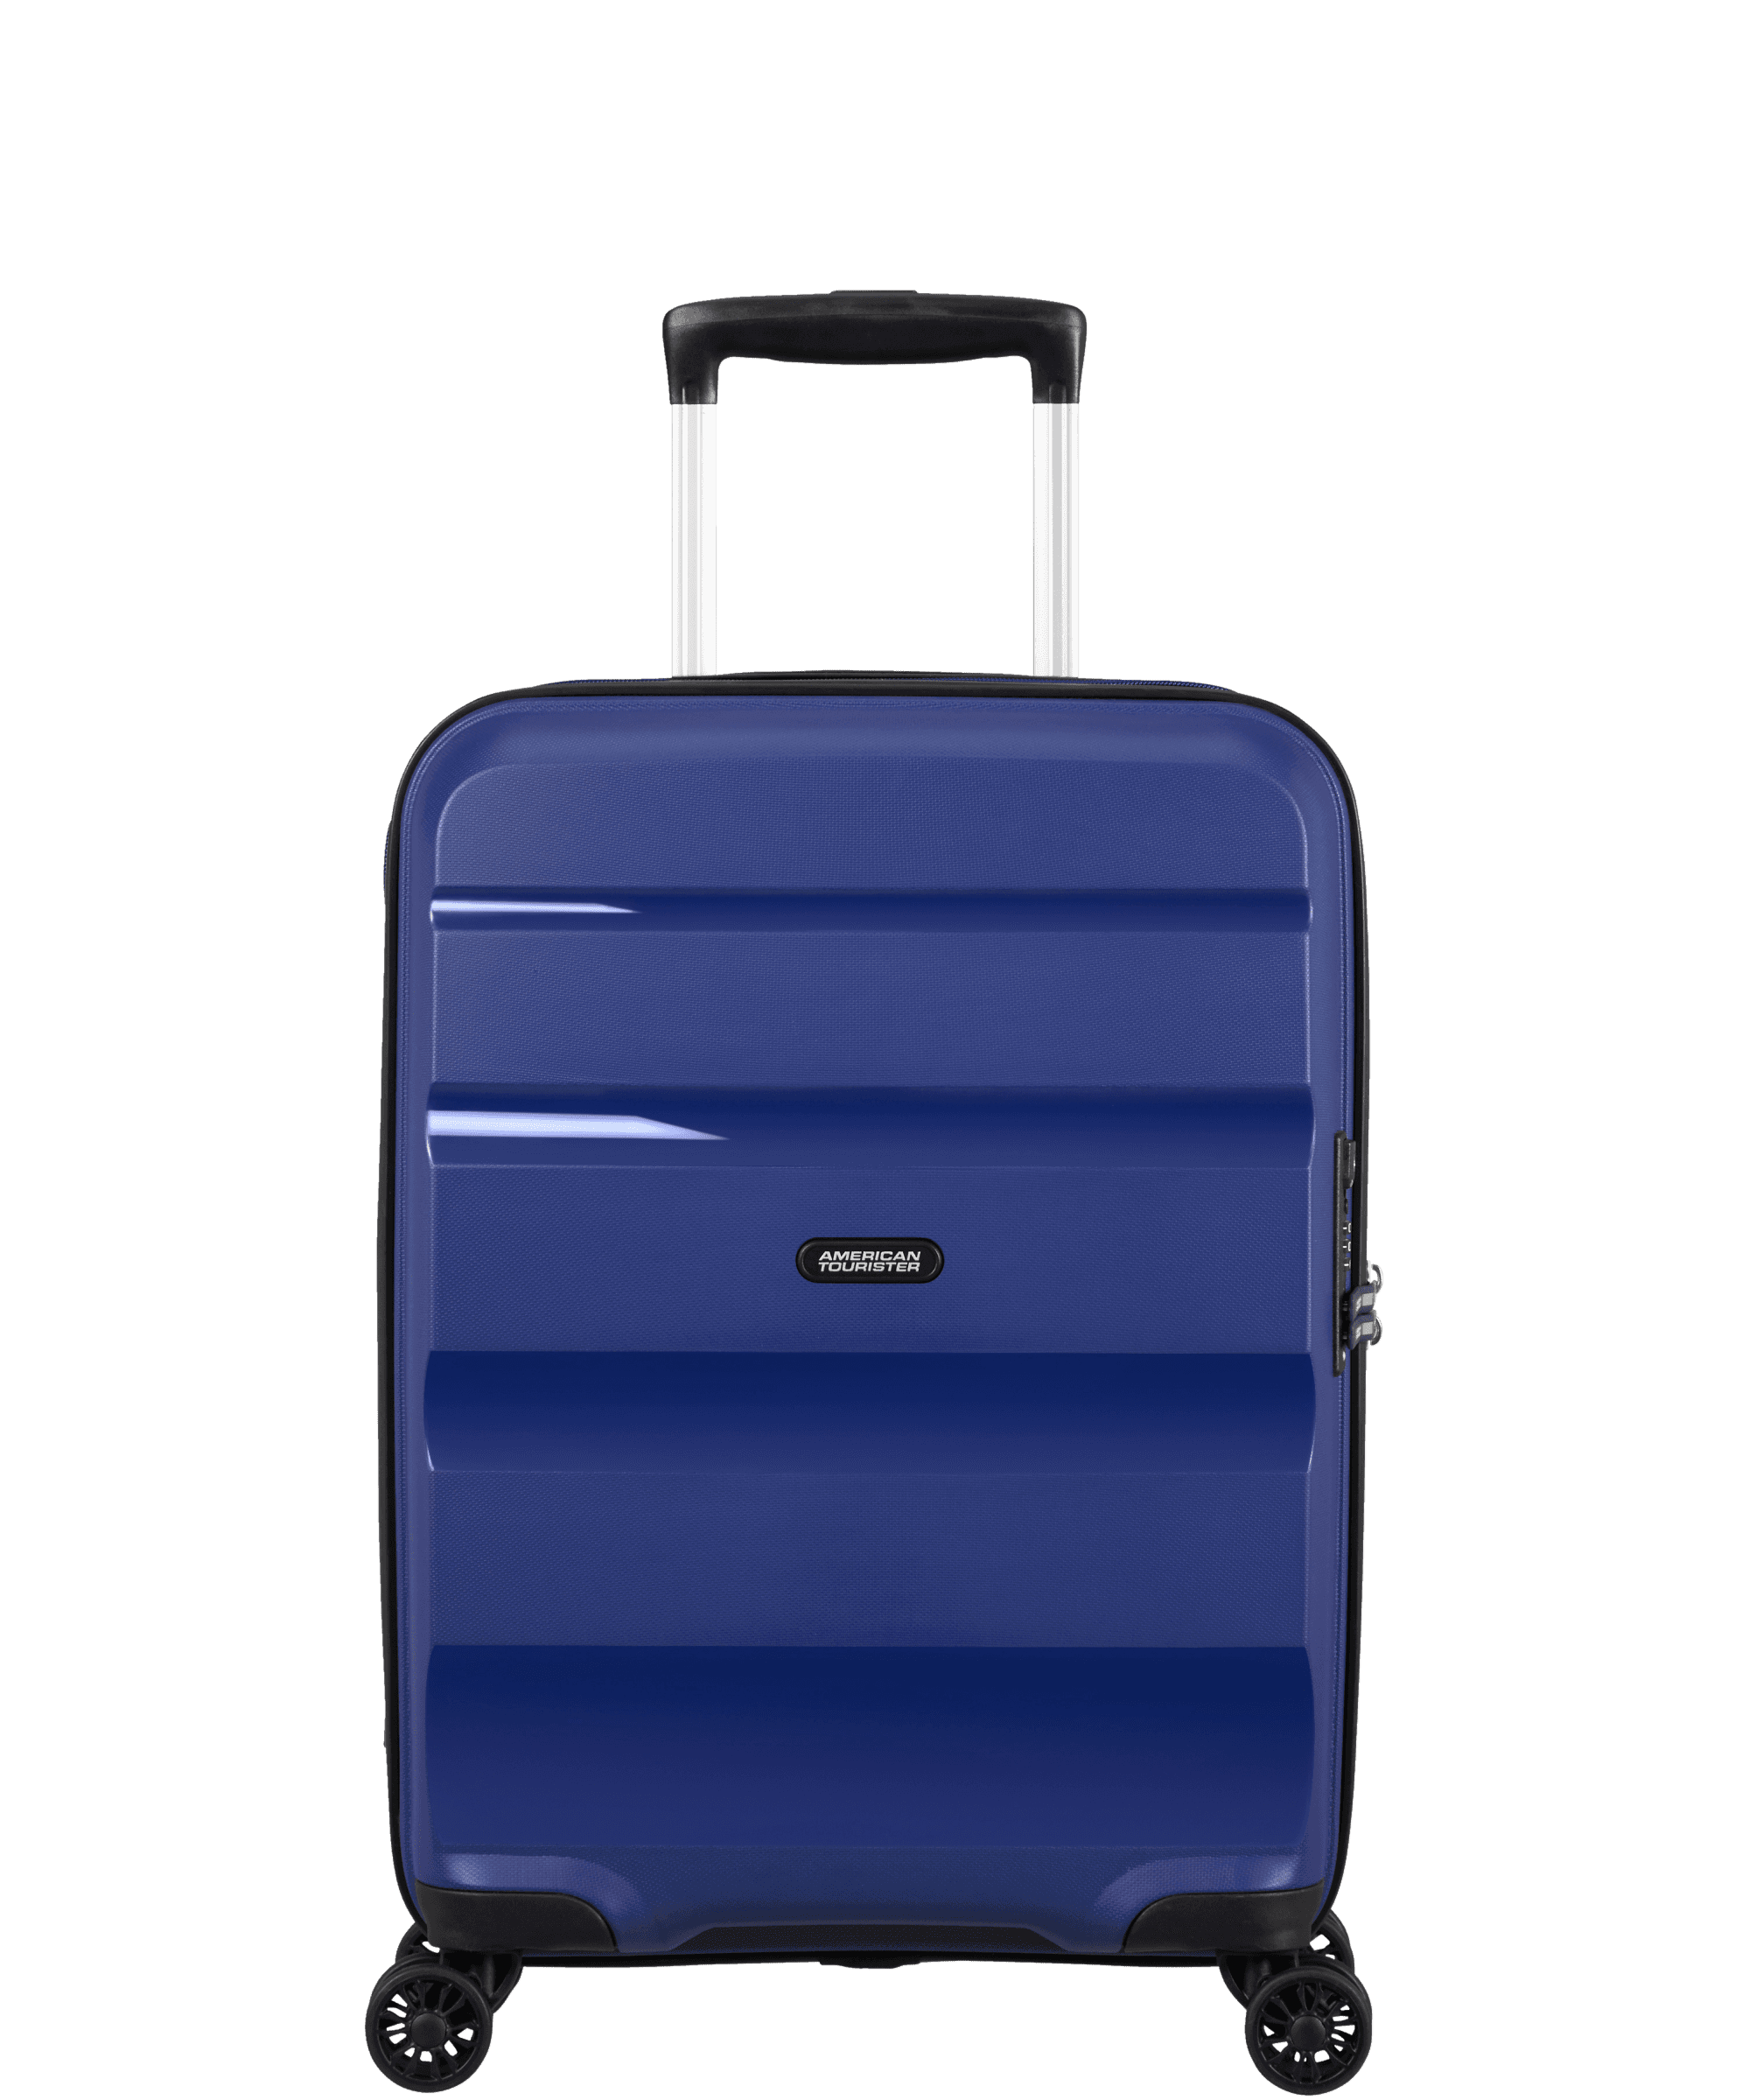 The 10 Best Suitcases for International Travel of 2023